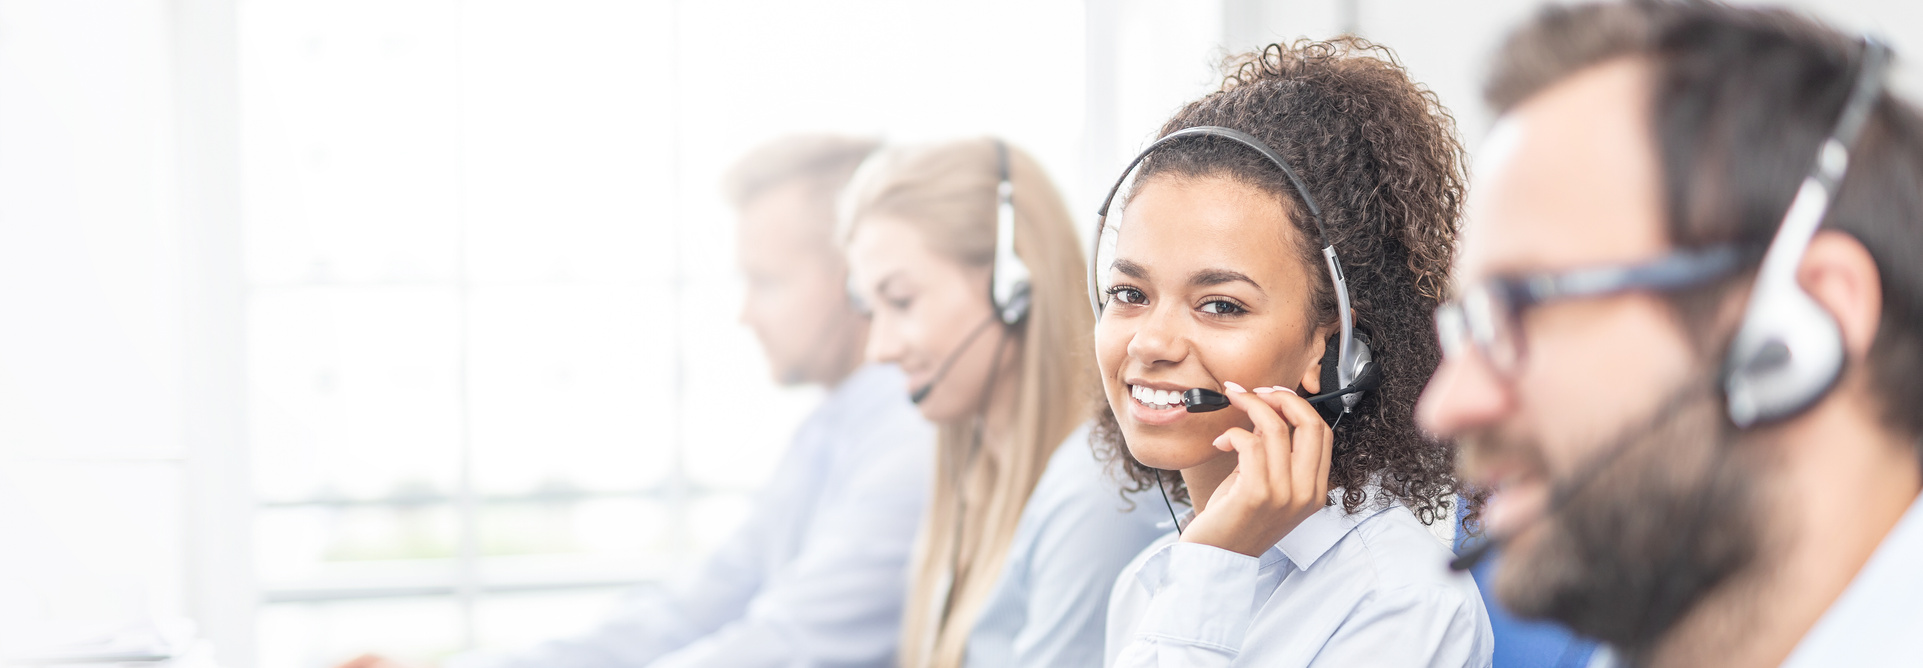 Call Center Worker Accompanied by Her Team